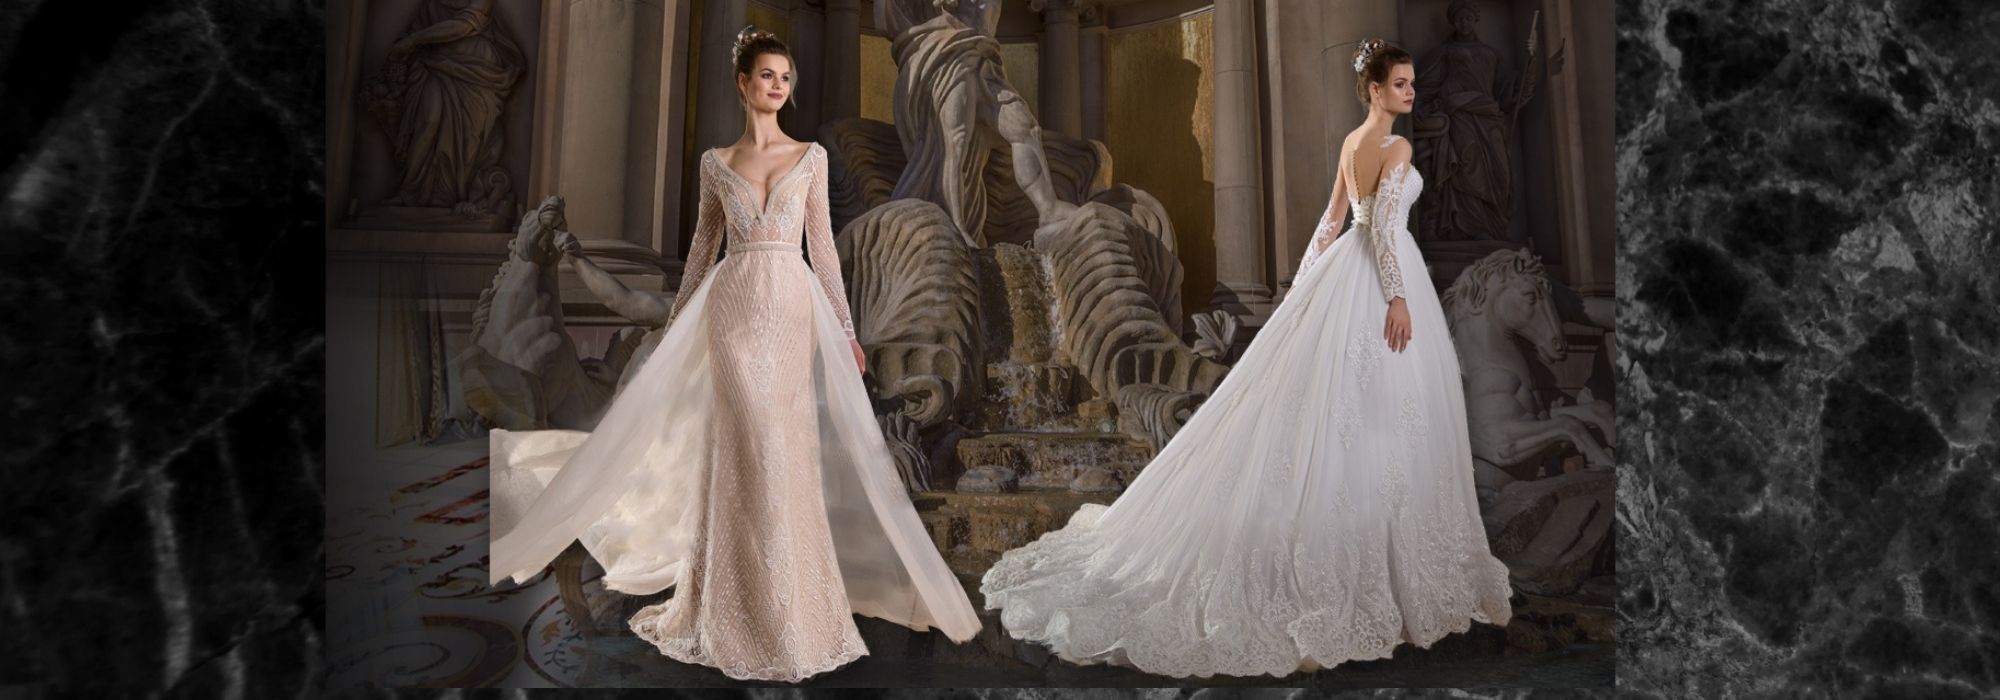 7 STUNNING TIPS TO BUY THE BEST WEDDING GOWN